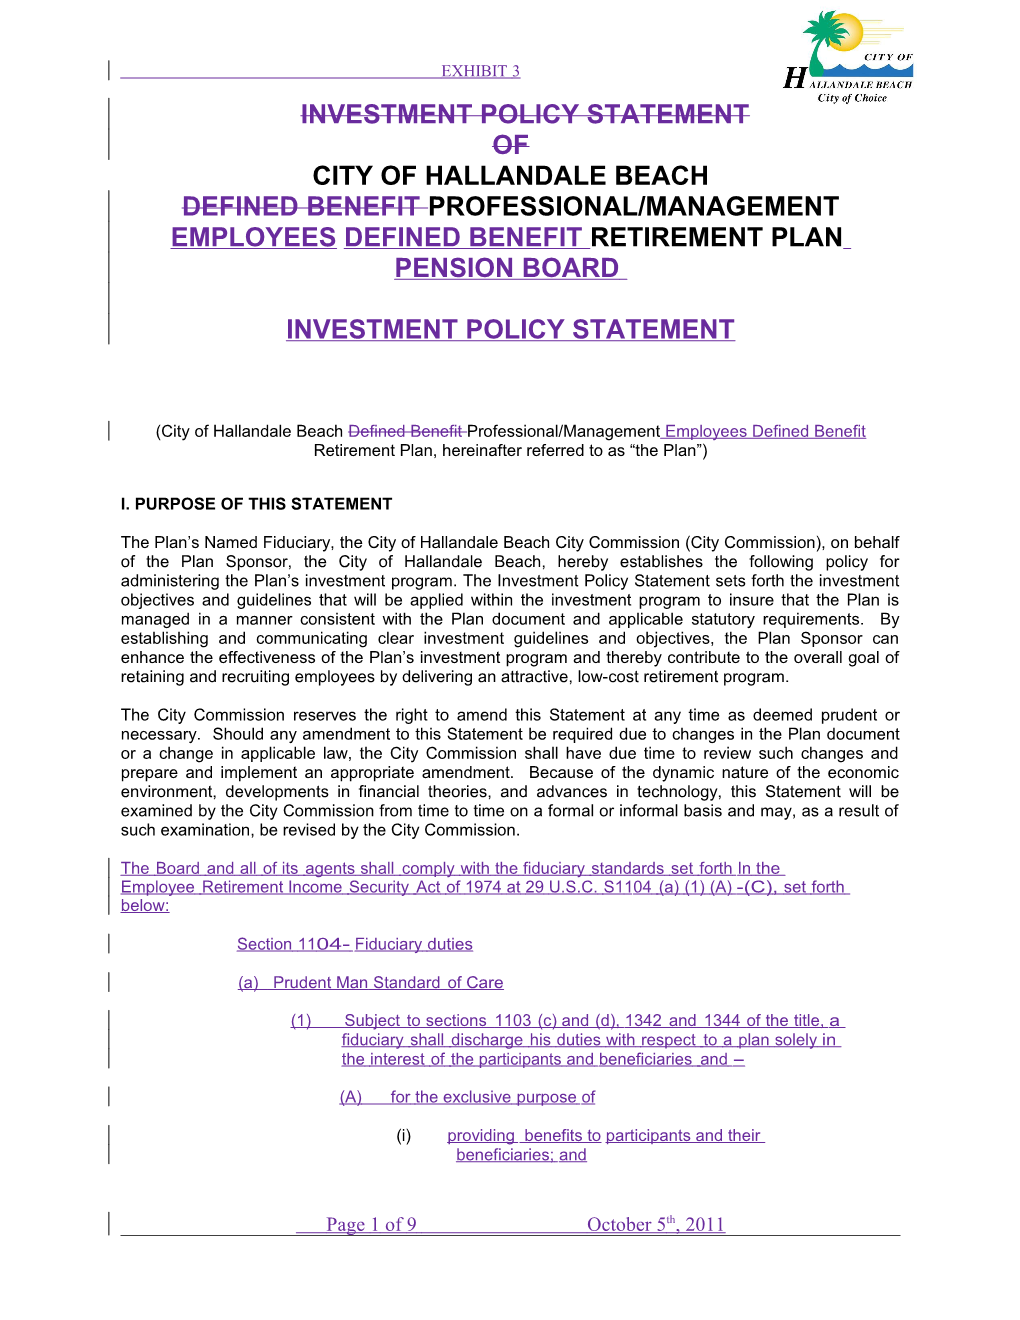 Investment Policy Statement Of